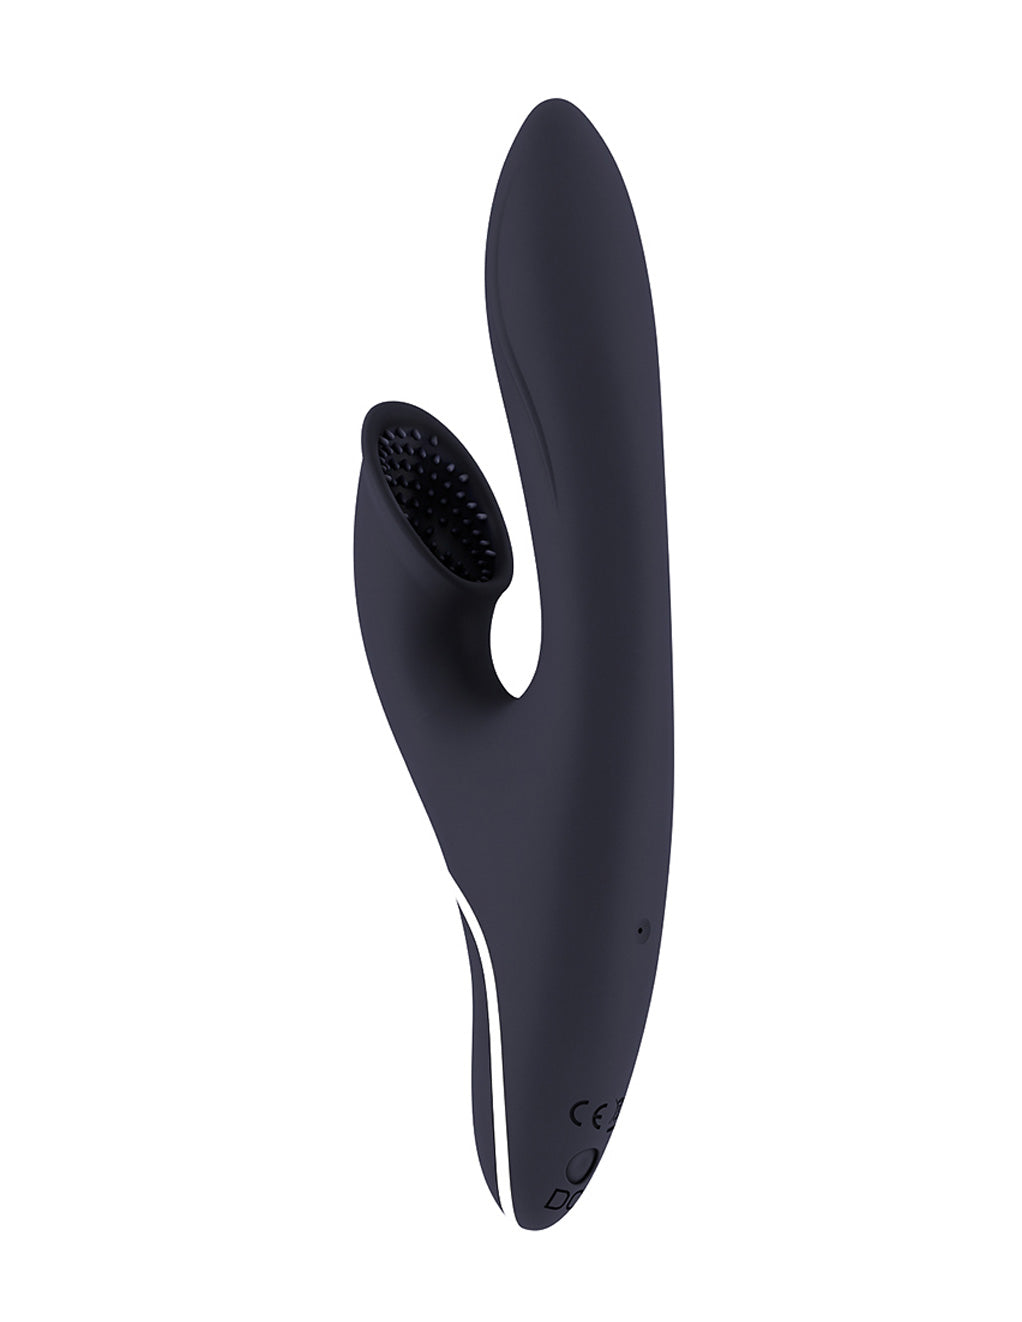 Rabbit Clitoral Suction Vibrator by Hiky Black Sex Toy